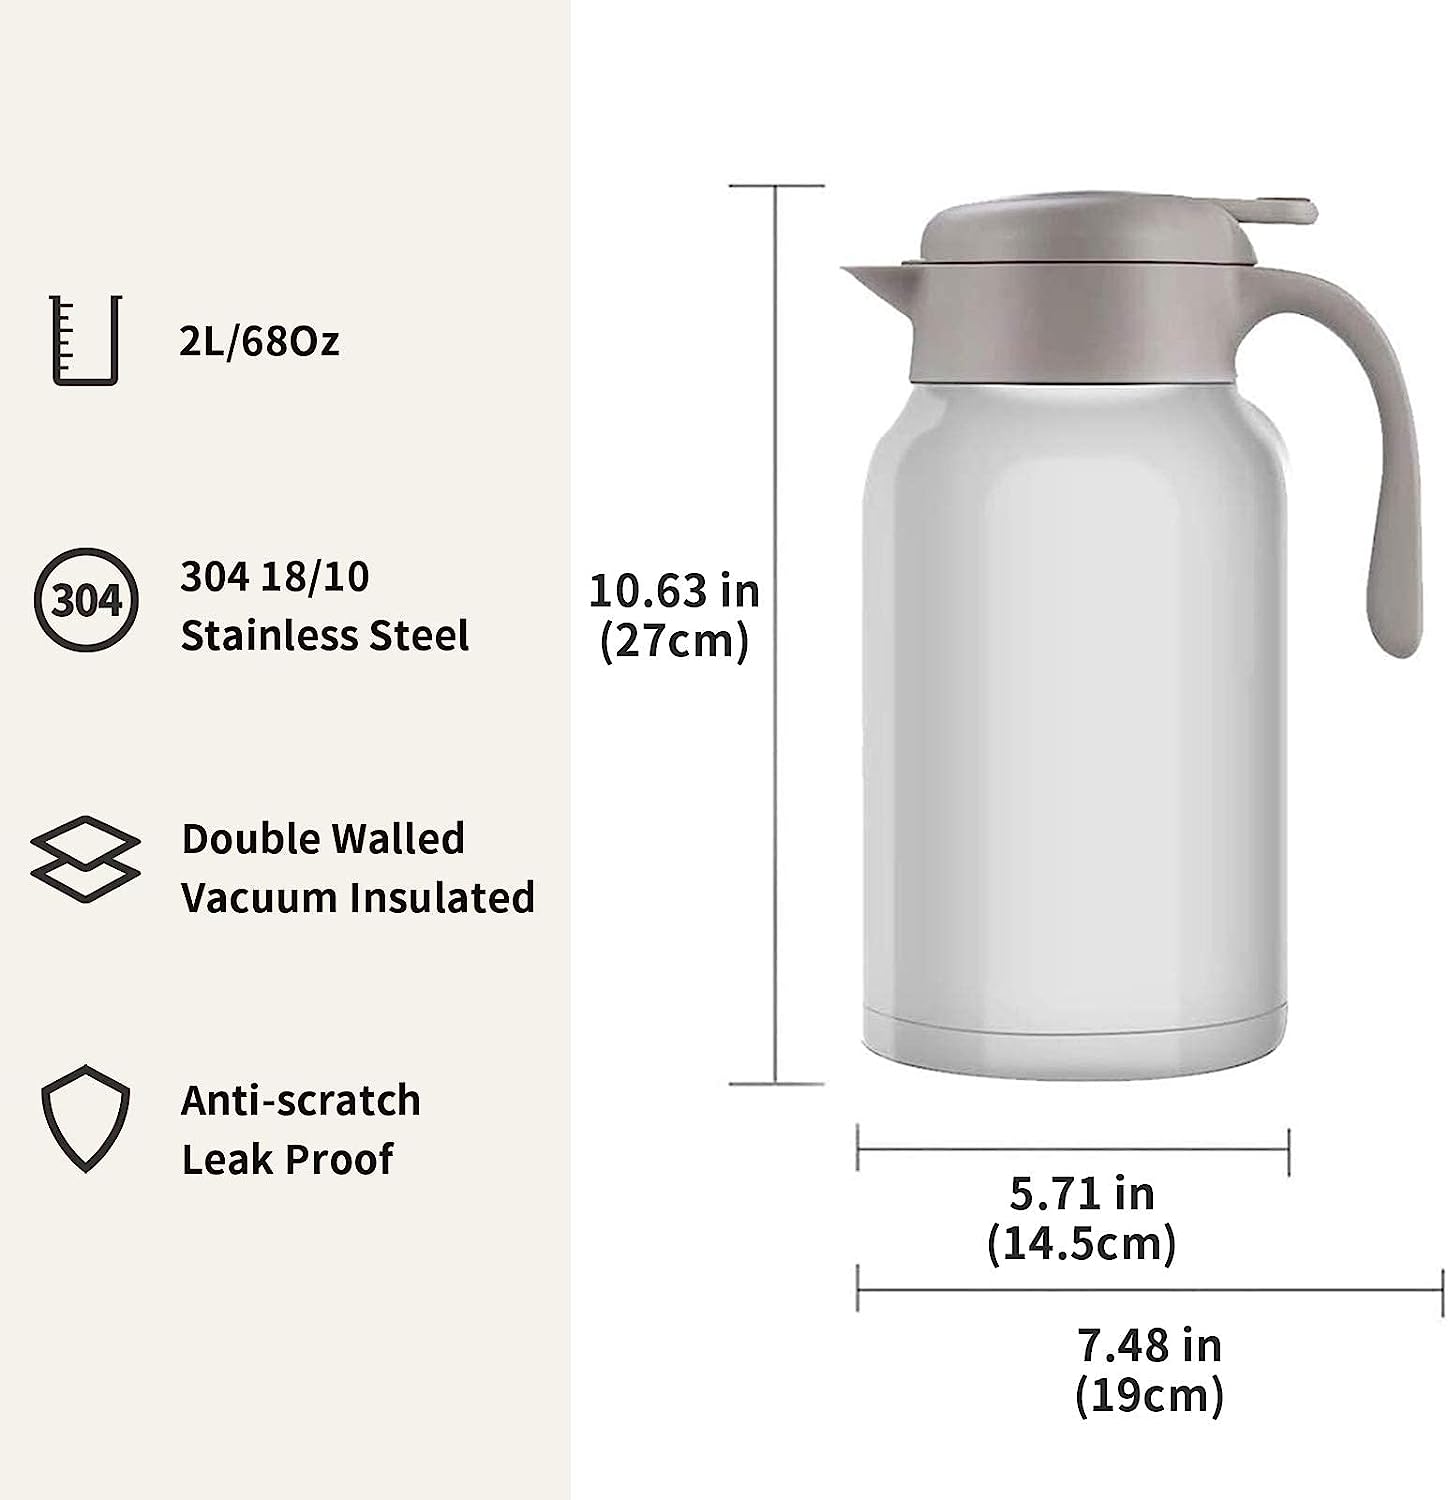 Luvan 2.0L 68oz Food-grade 304 Stainless Steel Thermal Carafe/Double Walled  Vacuum Insulated Coffee Pot with Press Button Top,12+ Hrs Heat&Cold